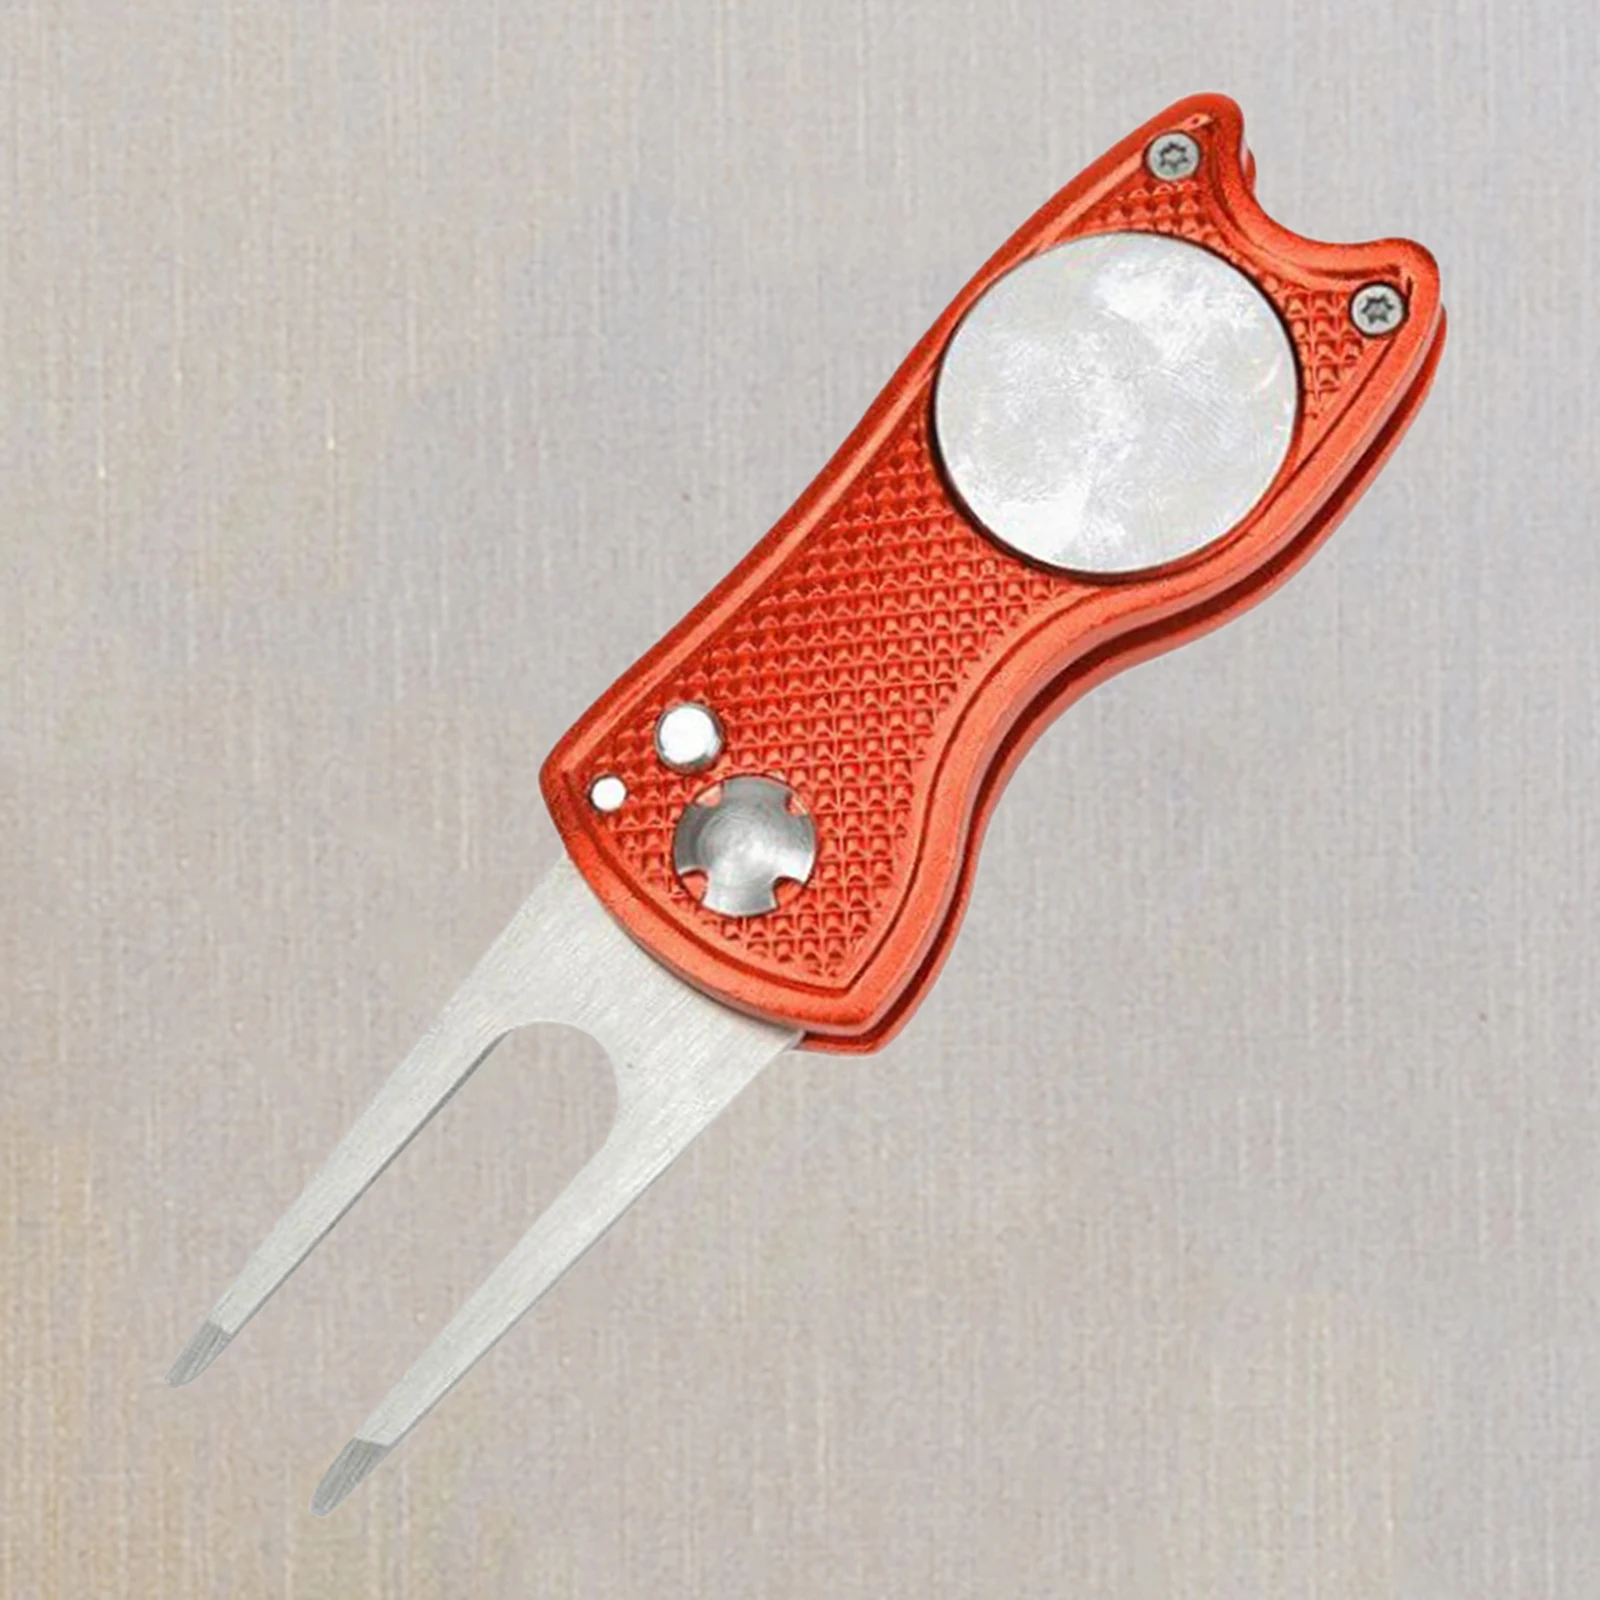 Foldable Golf Divot Tool with Golf Ball Tool Marker Pitch Cleaner Golf Pitchfork Golf Accessories Putting Green Fork